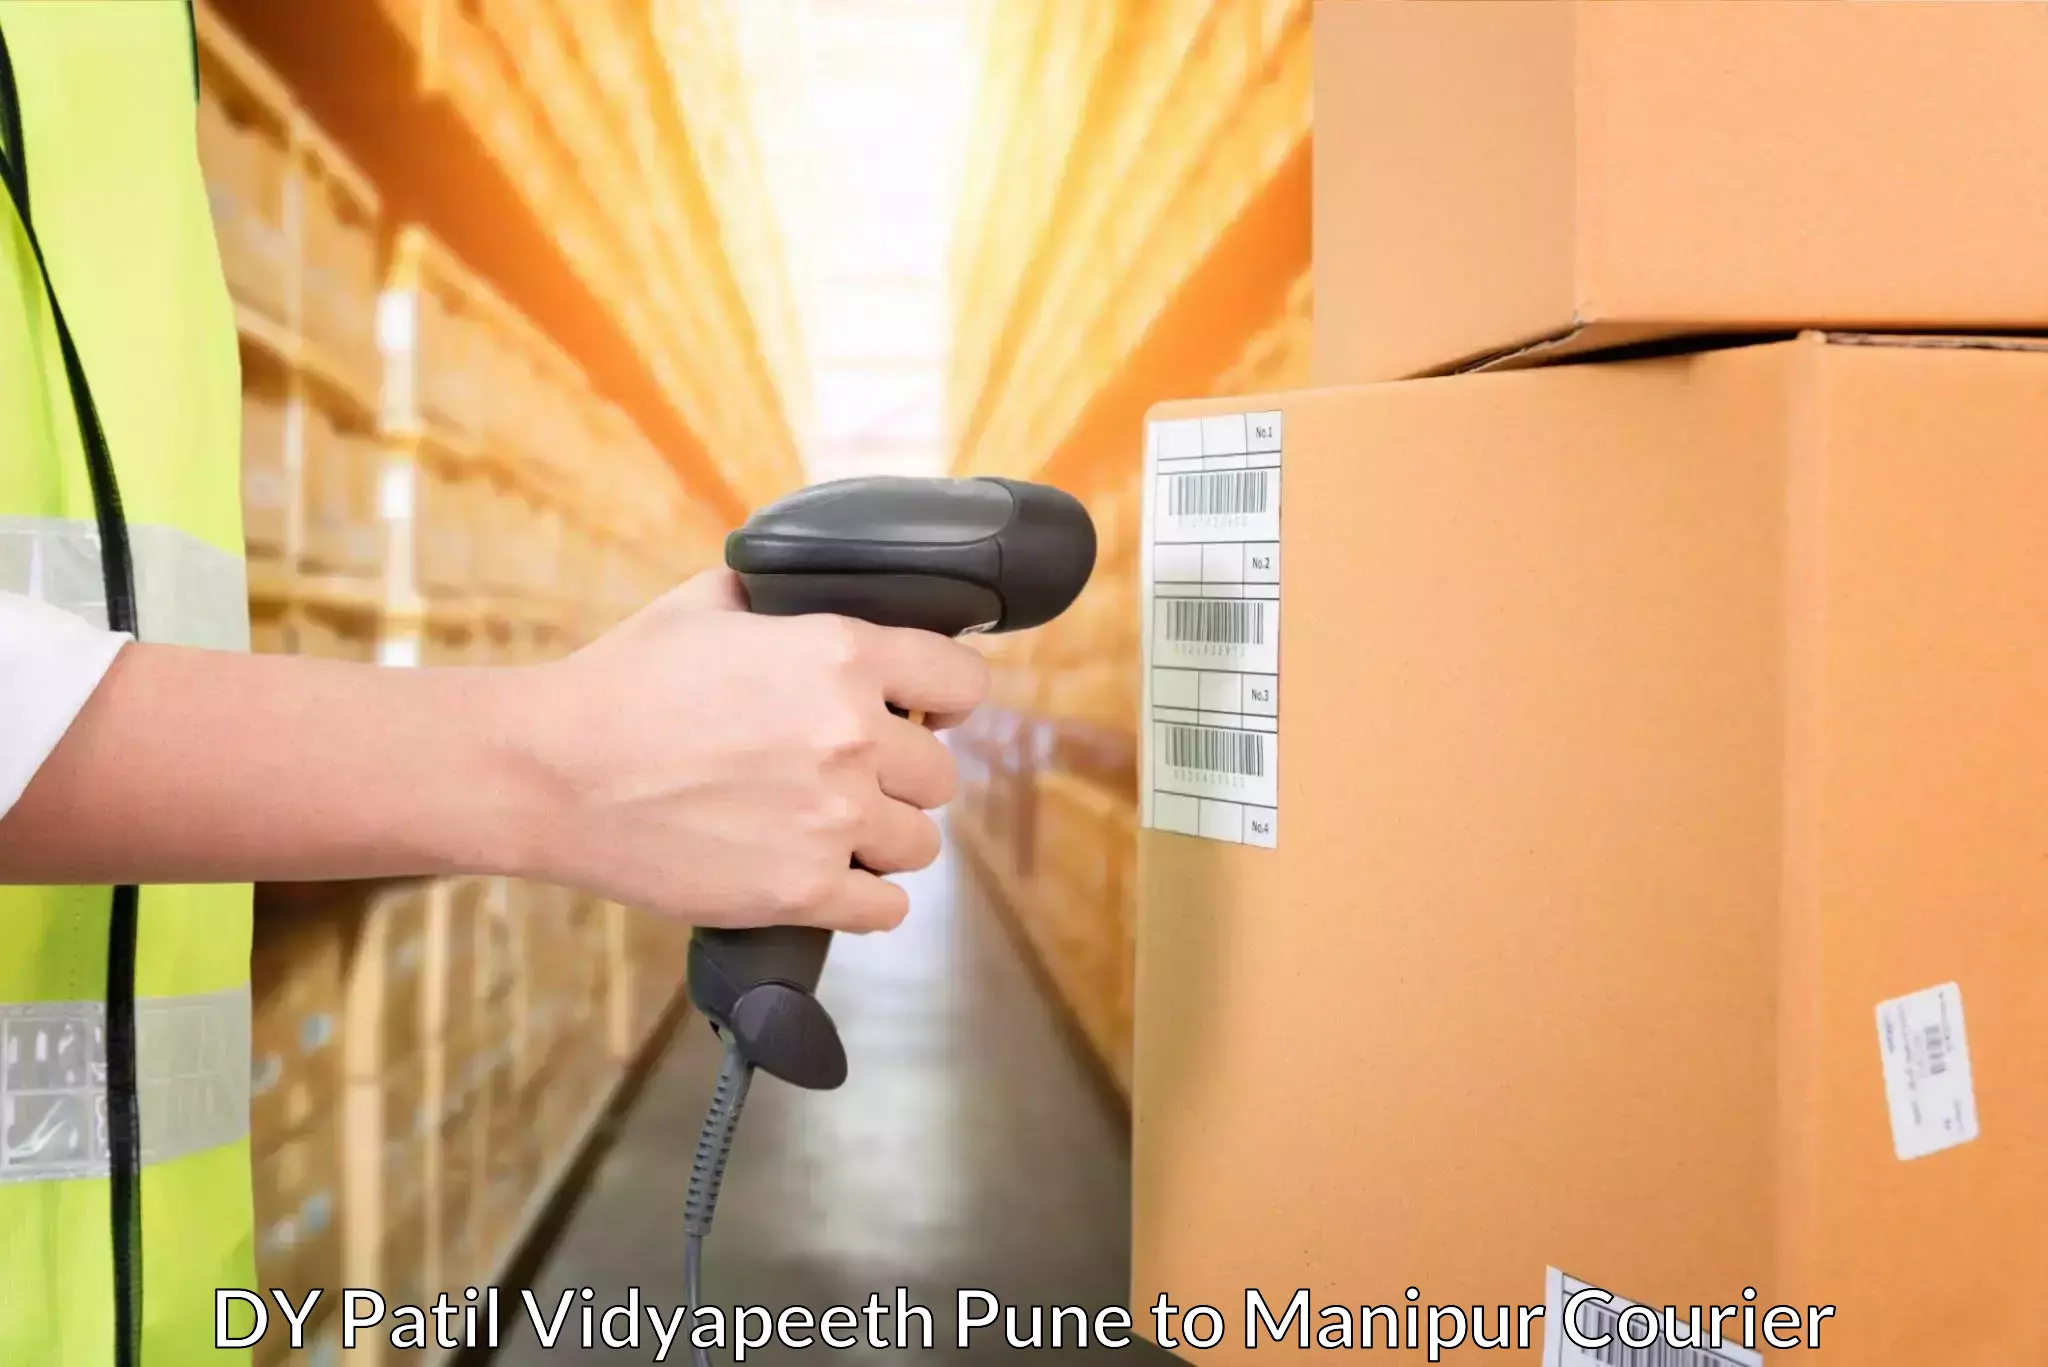 Fast delivery service DY Patil Vidyapeeth Pune to Chandel